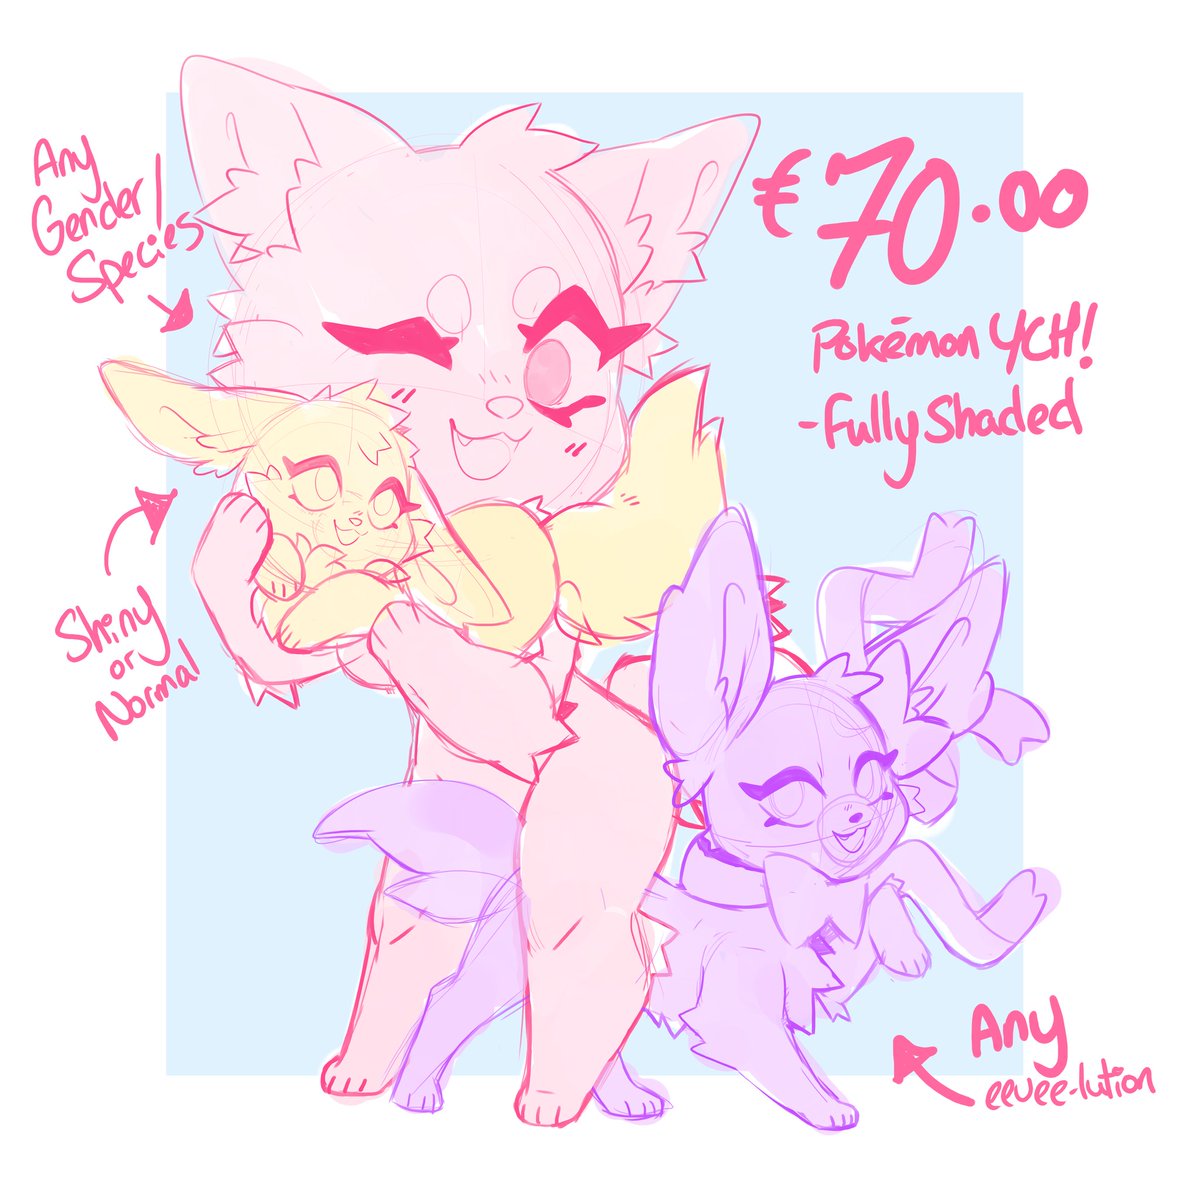 If anyone wants a little ych, look no further!! 🩷🎉 (reply to claim, RTs appreciated!)